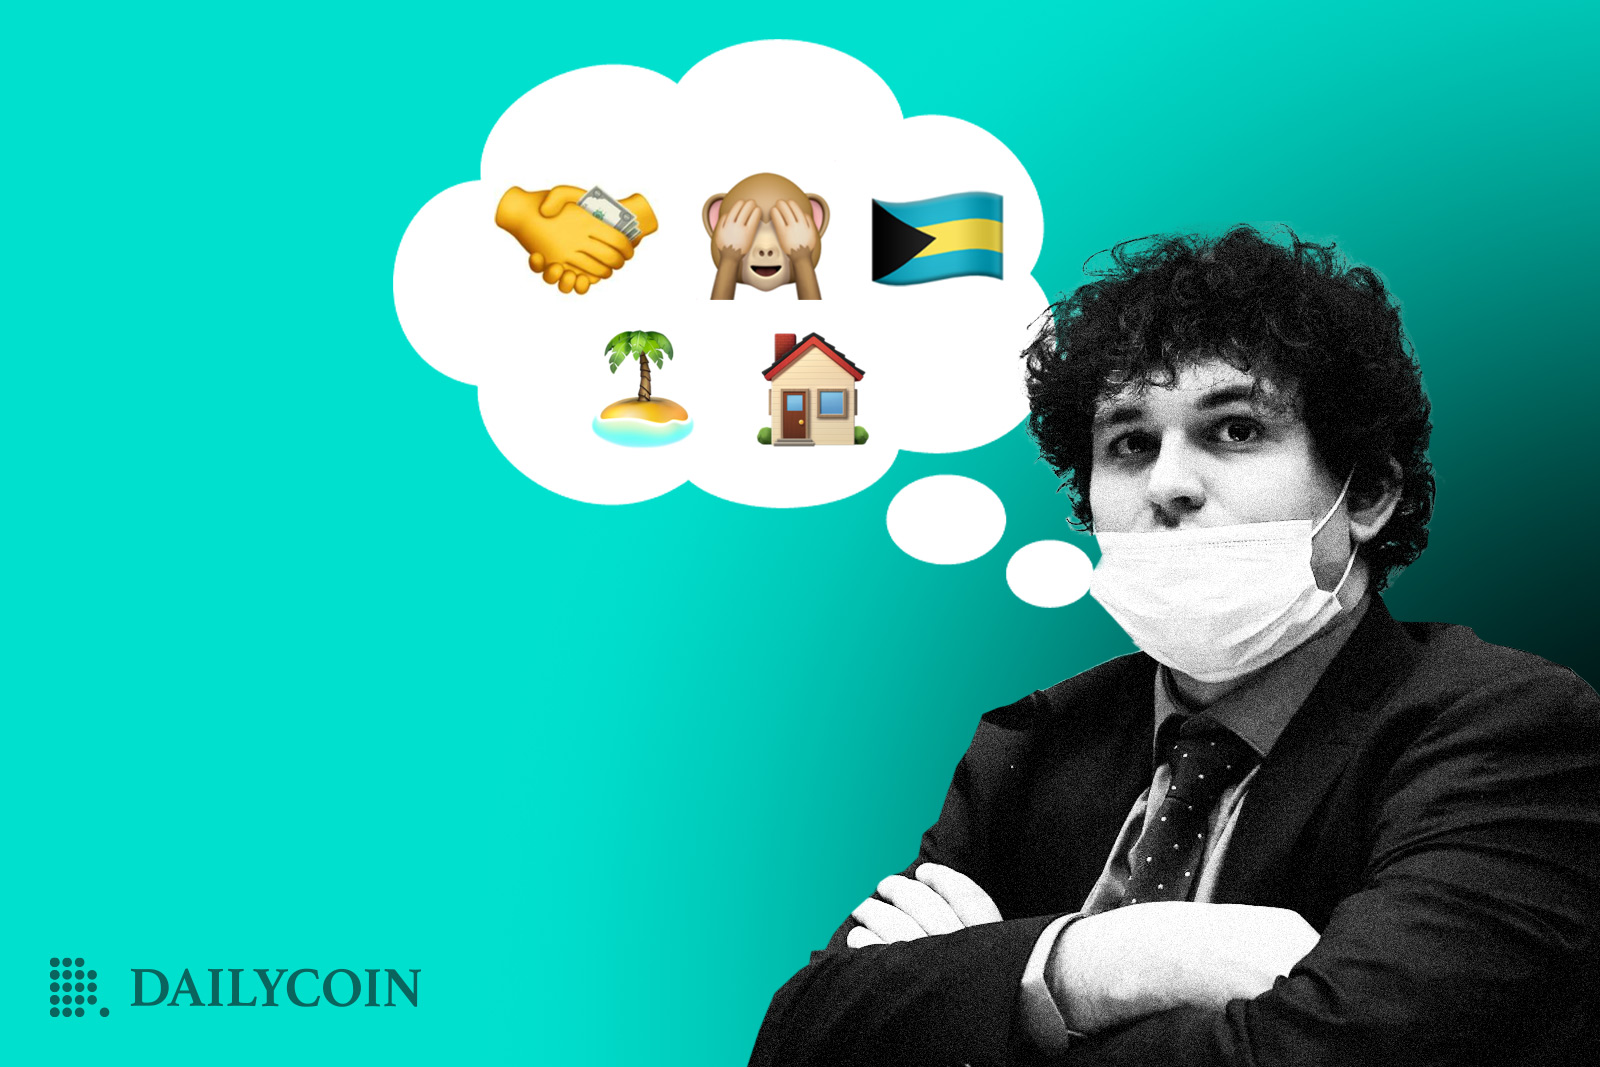 Sam Bankman-Fried stands with his arms crossed wearing a mask. From his covered mouth is a speech bubble depicting several emojis: handshake, see no evil, Bahamas flag, island, house